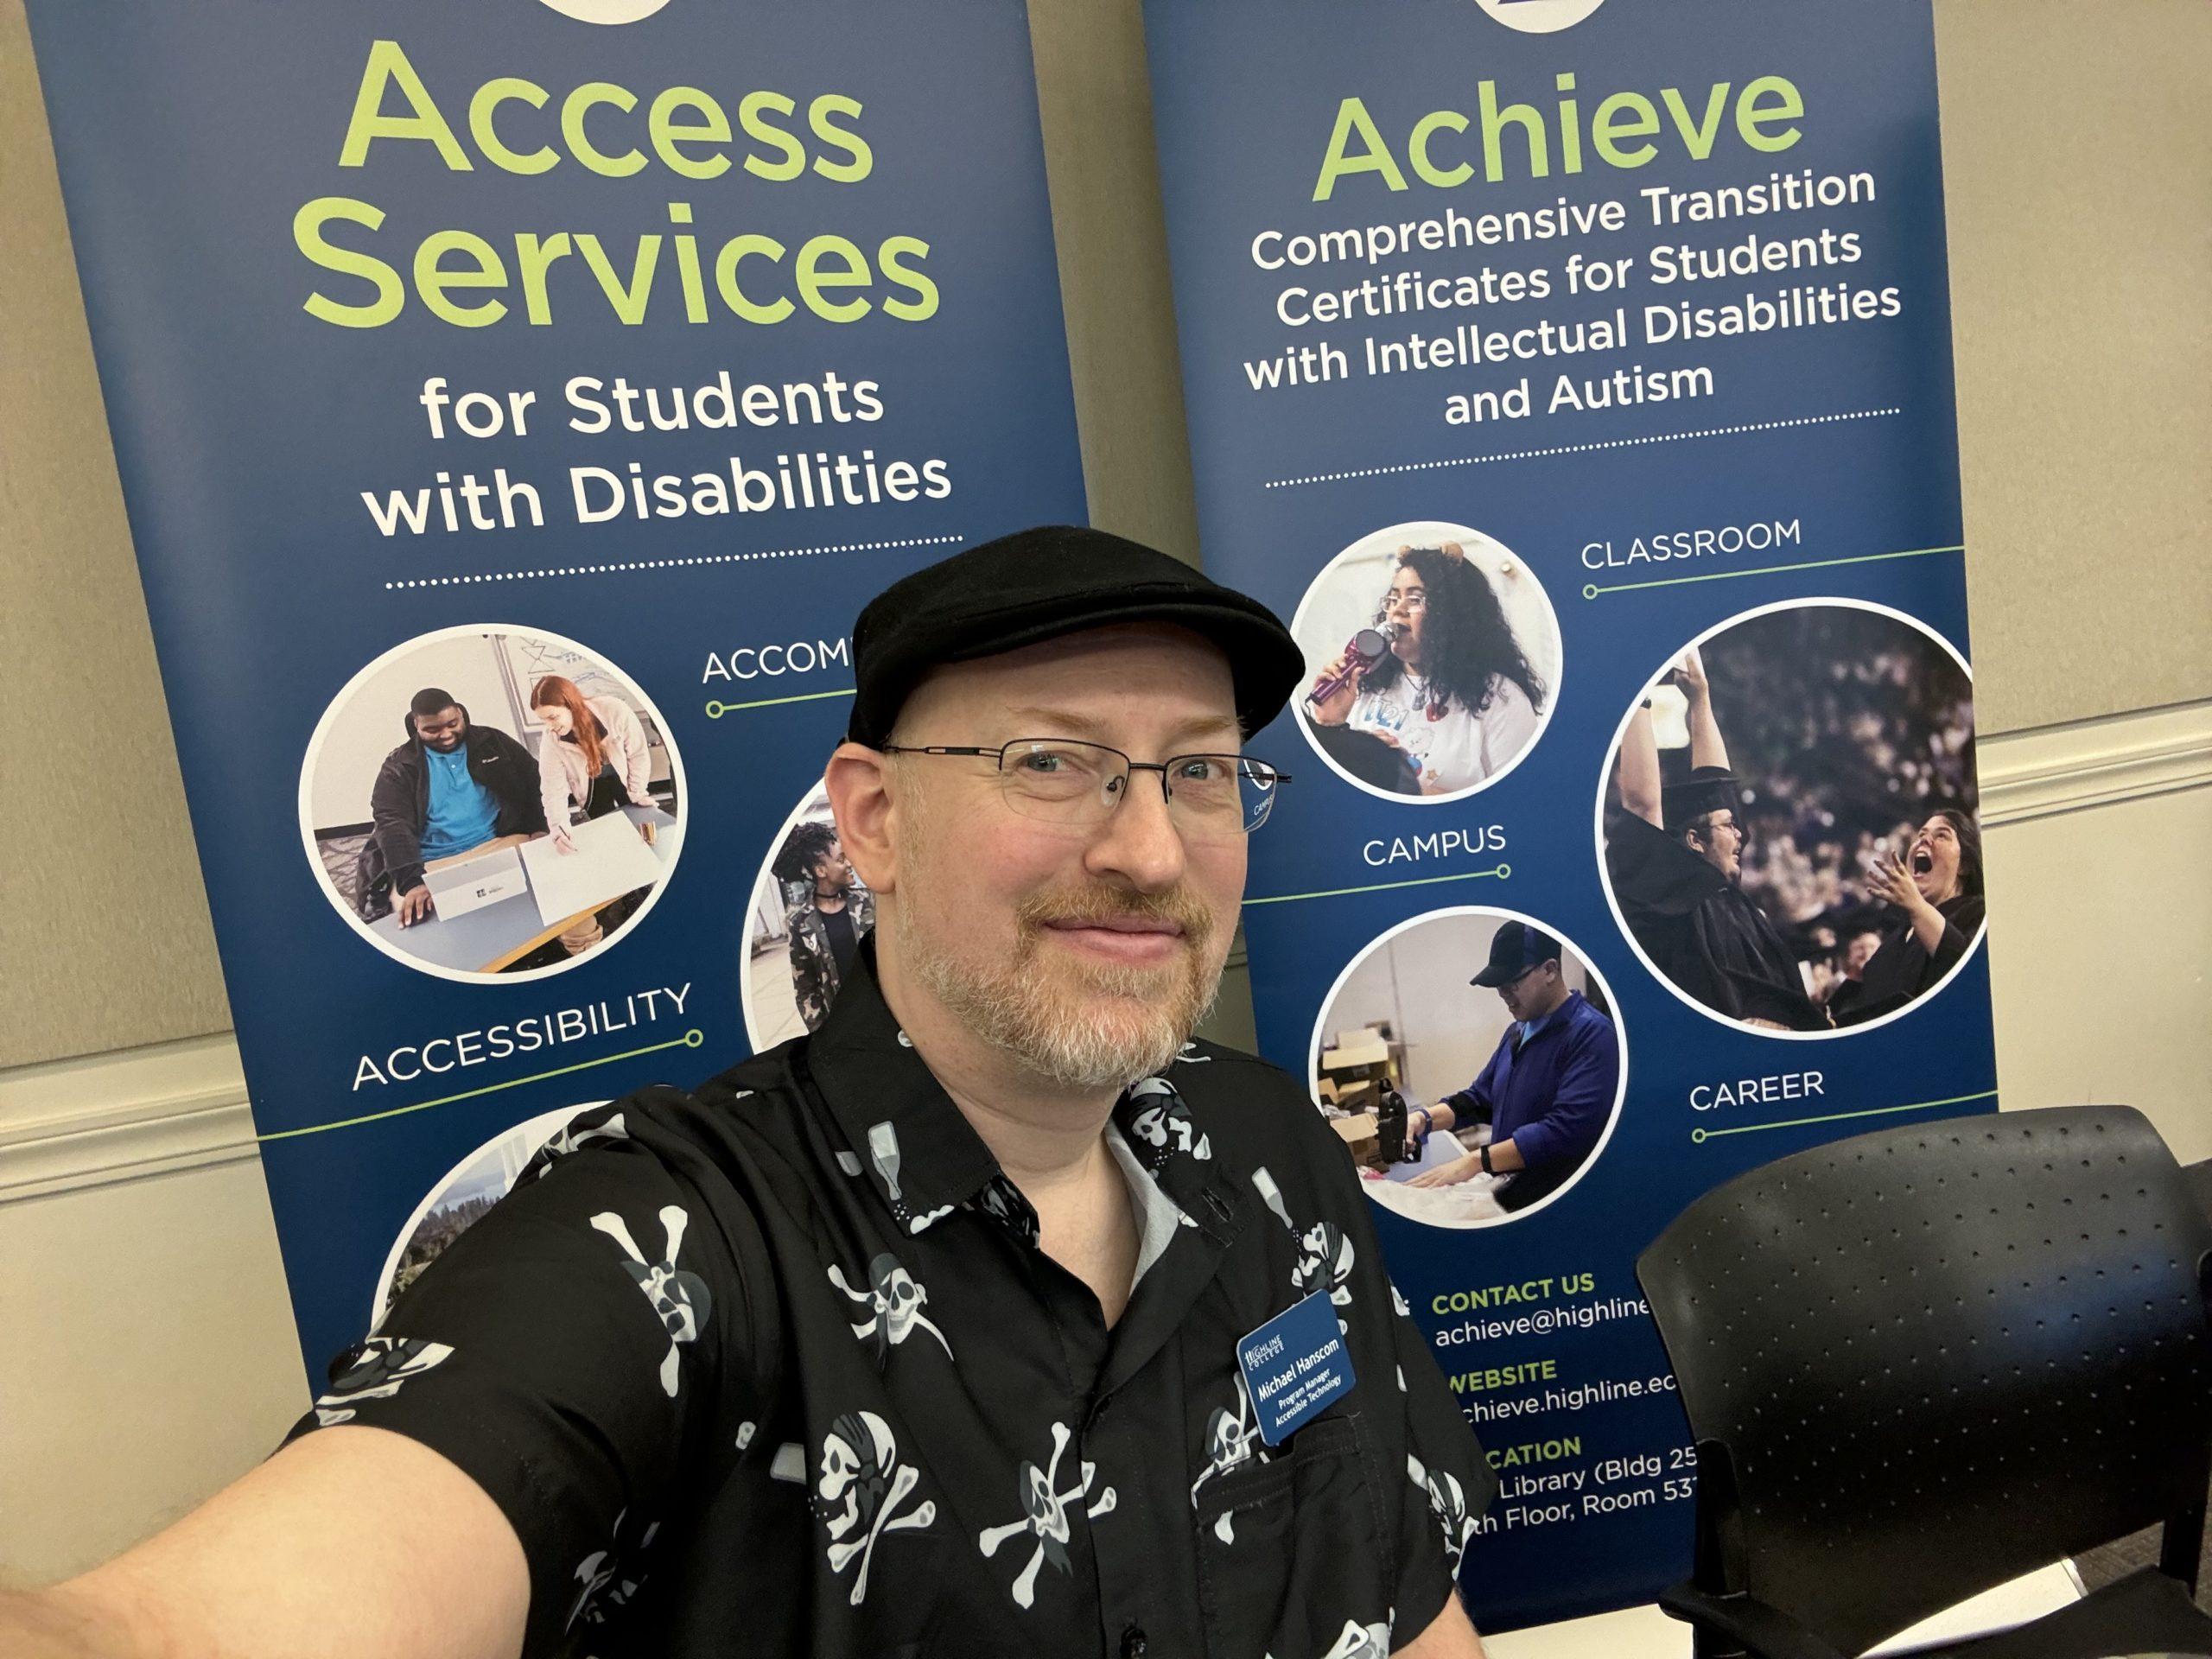 Me wearing a black short-sleeve button-up shirt with a skull and crossbones pattern, in front of signs advertising the Access Services department for students with disabilities and the Achieve program for students with intellectual disabilities.